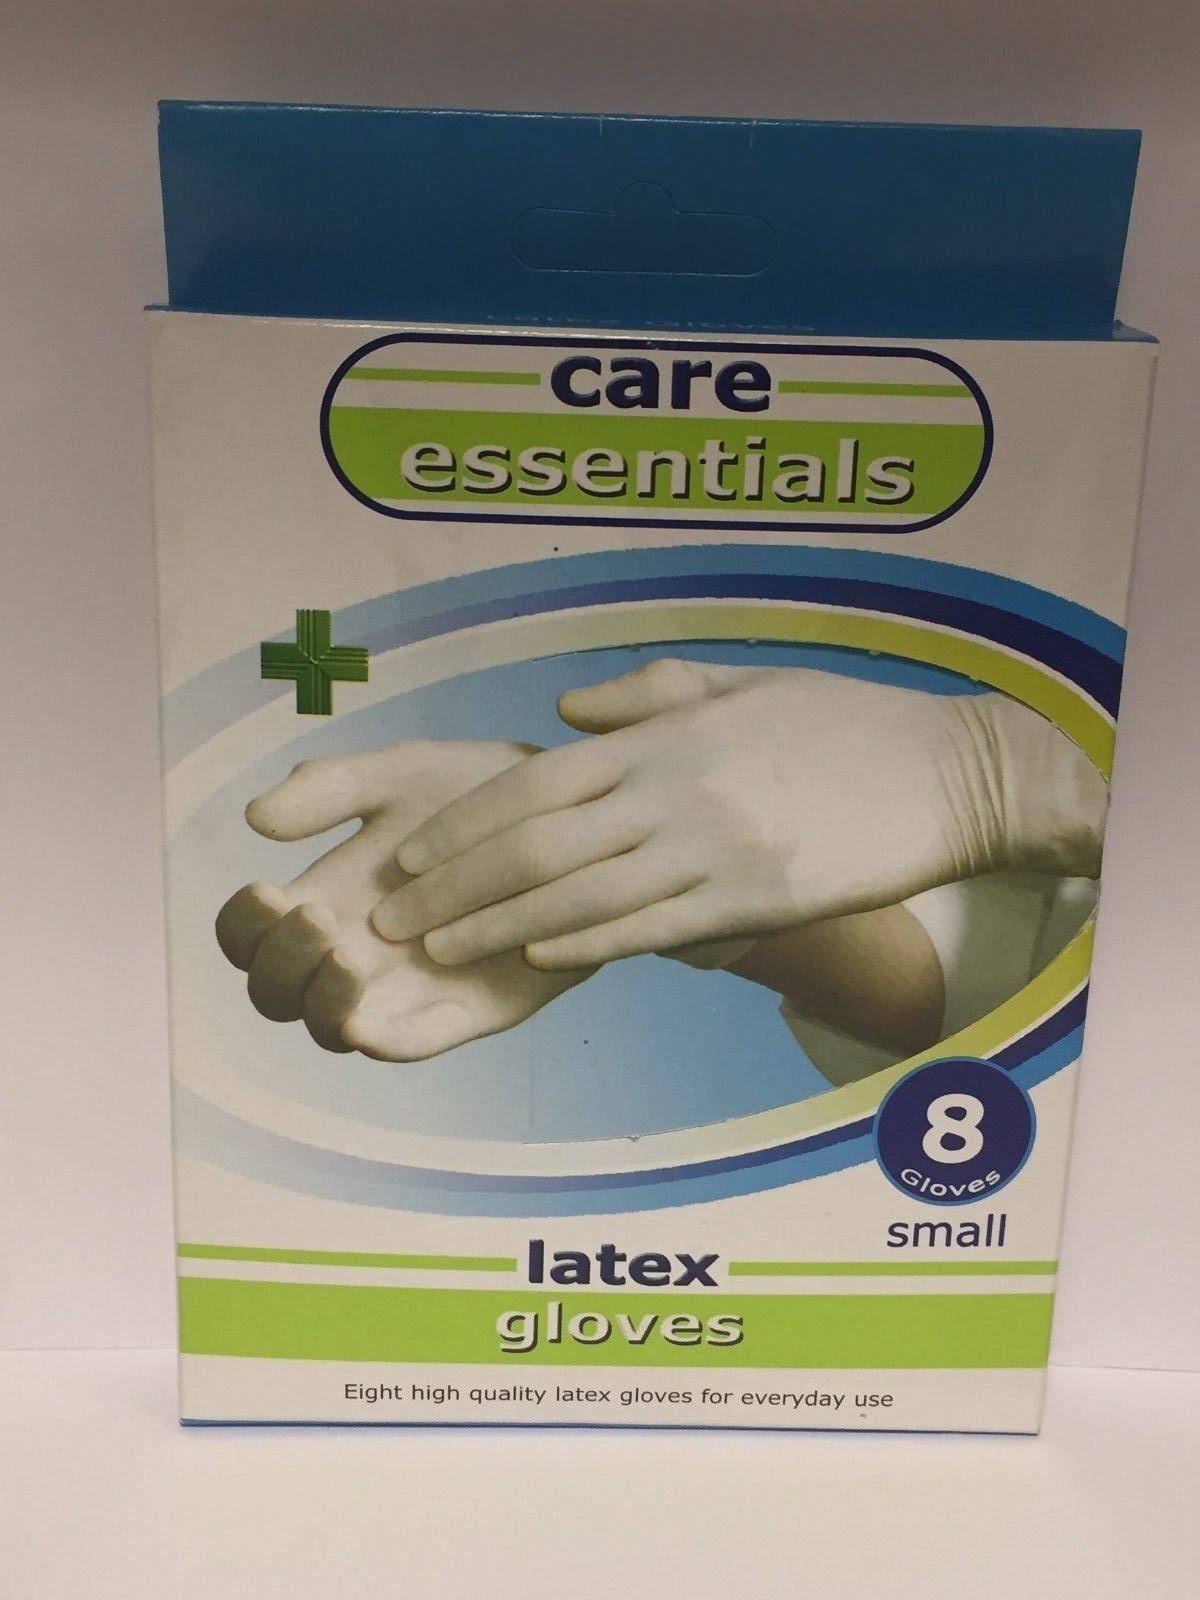 Fortuna Care Essentials Latex Gloves Size Small - 8 Gloves